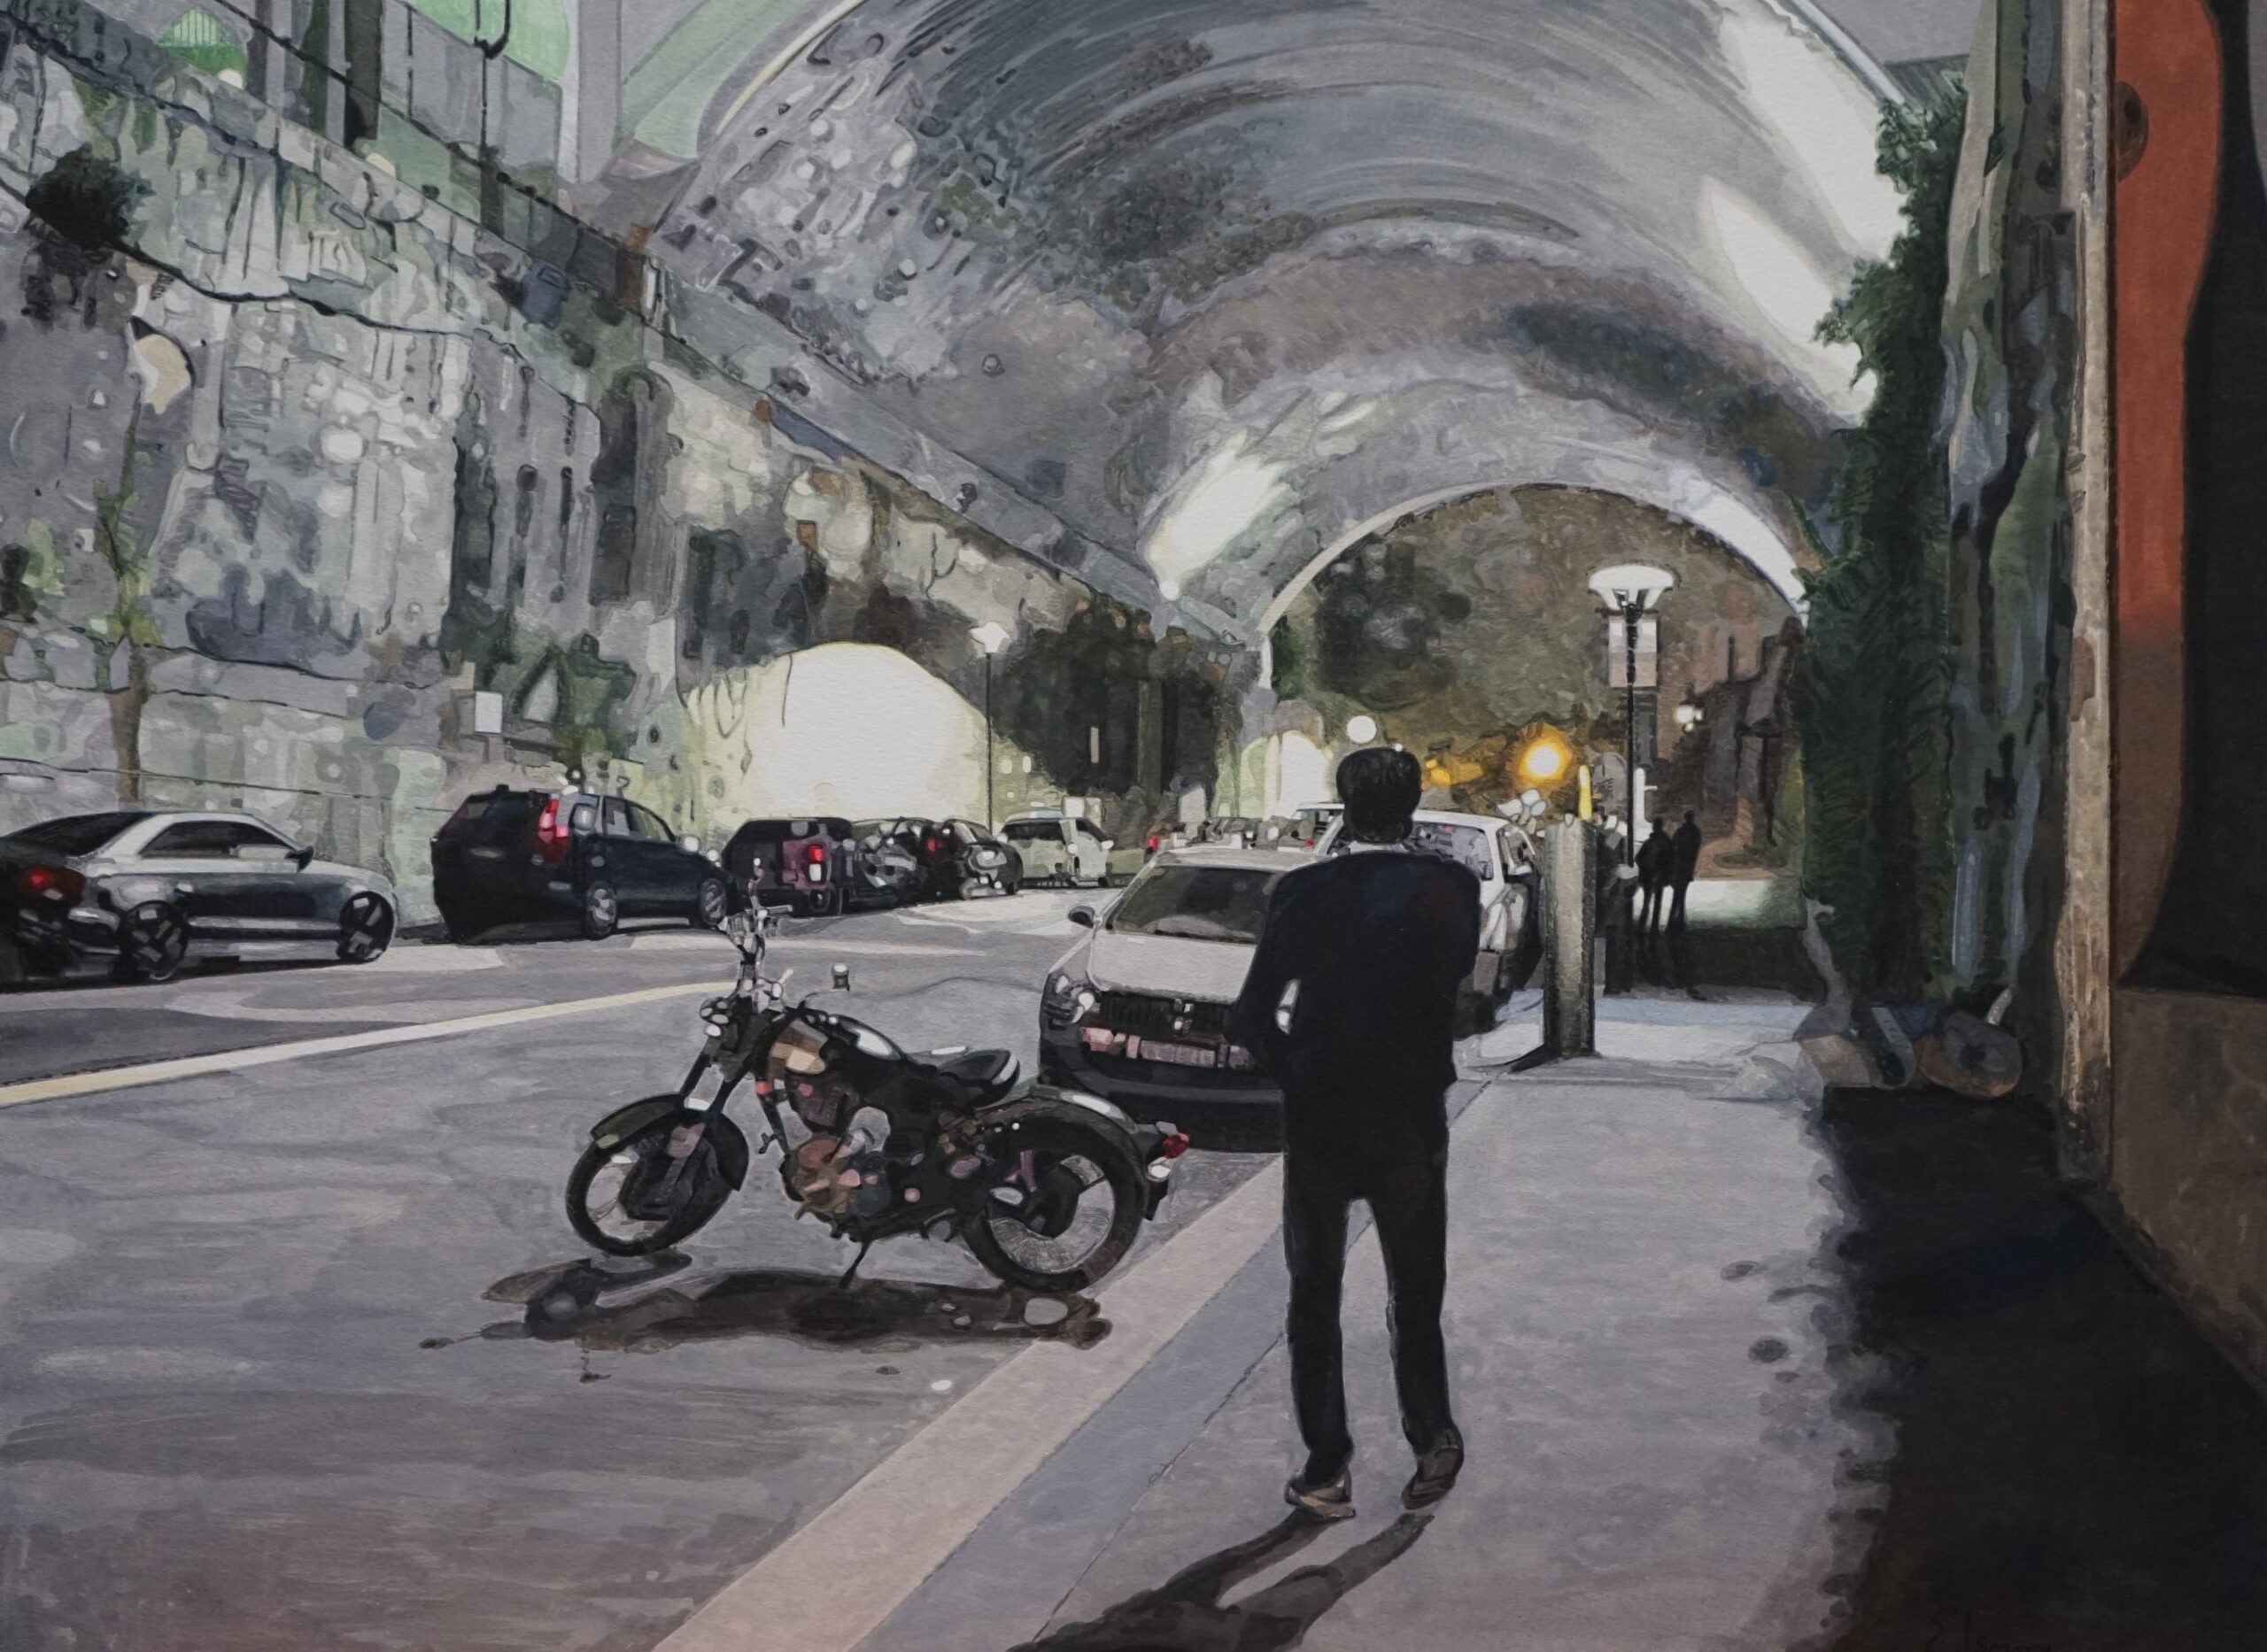 Painting of a man and a motorcycle under arches